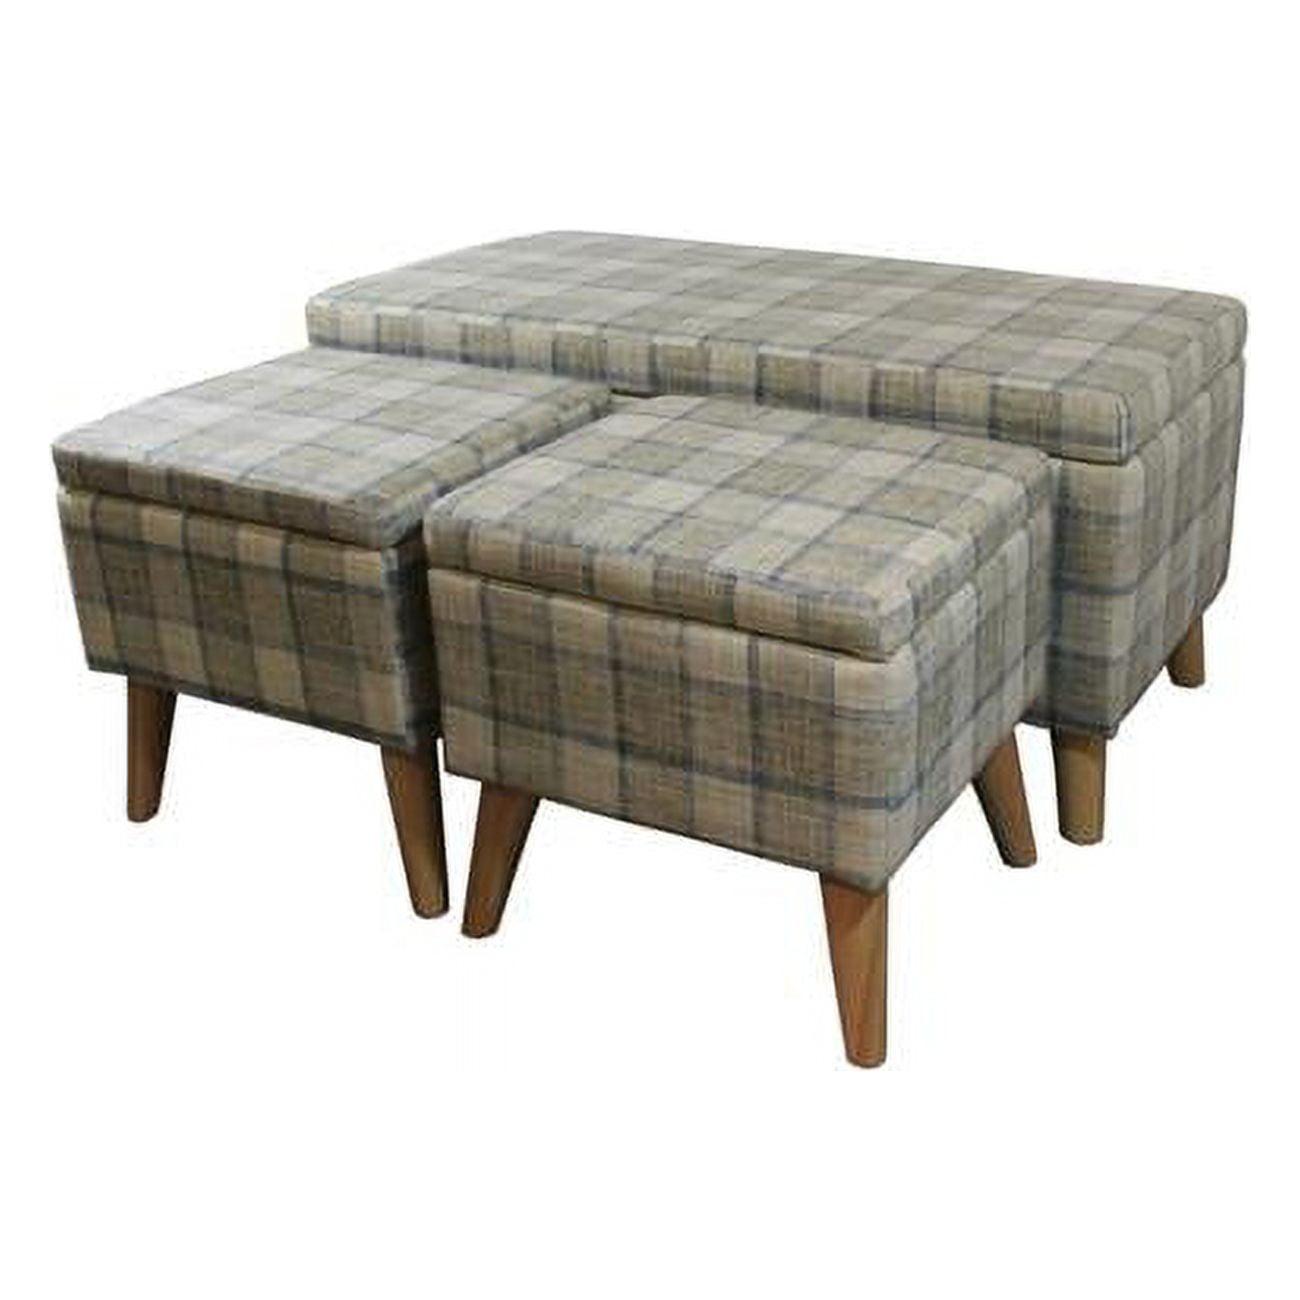 Taupe & Blue Plaid Upholstered Storage Bench & Ottoman Trio